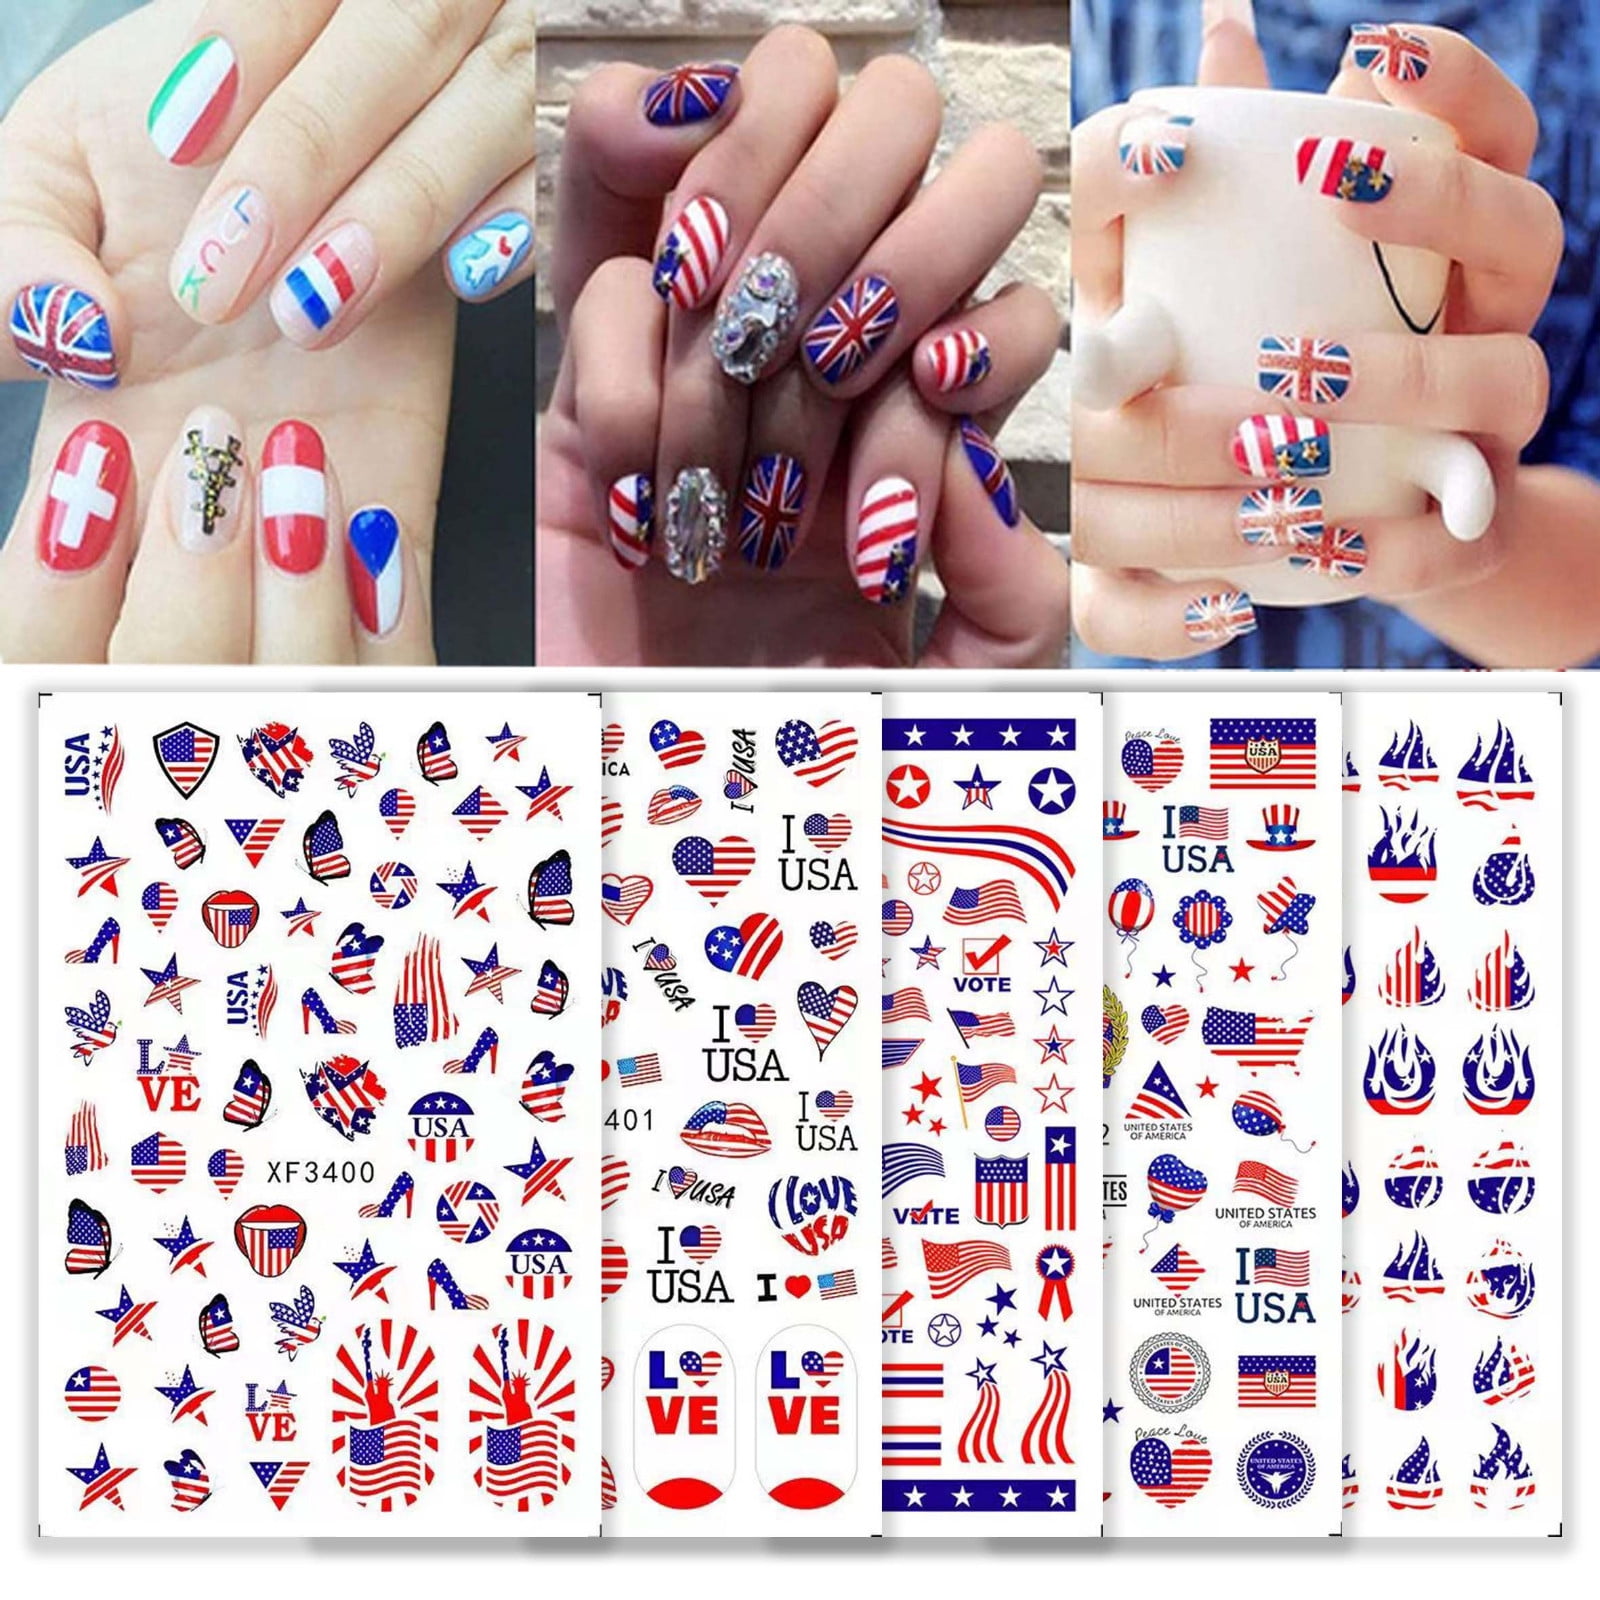 5 Must Try Nail Art Ideas For India's Independence Day | ILMP Blogs